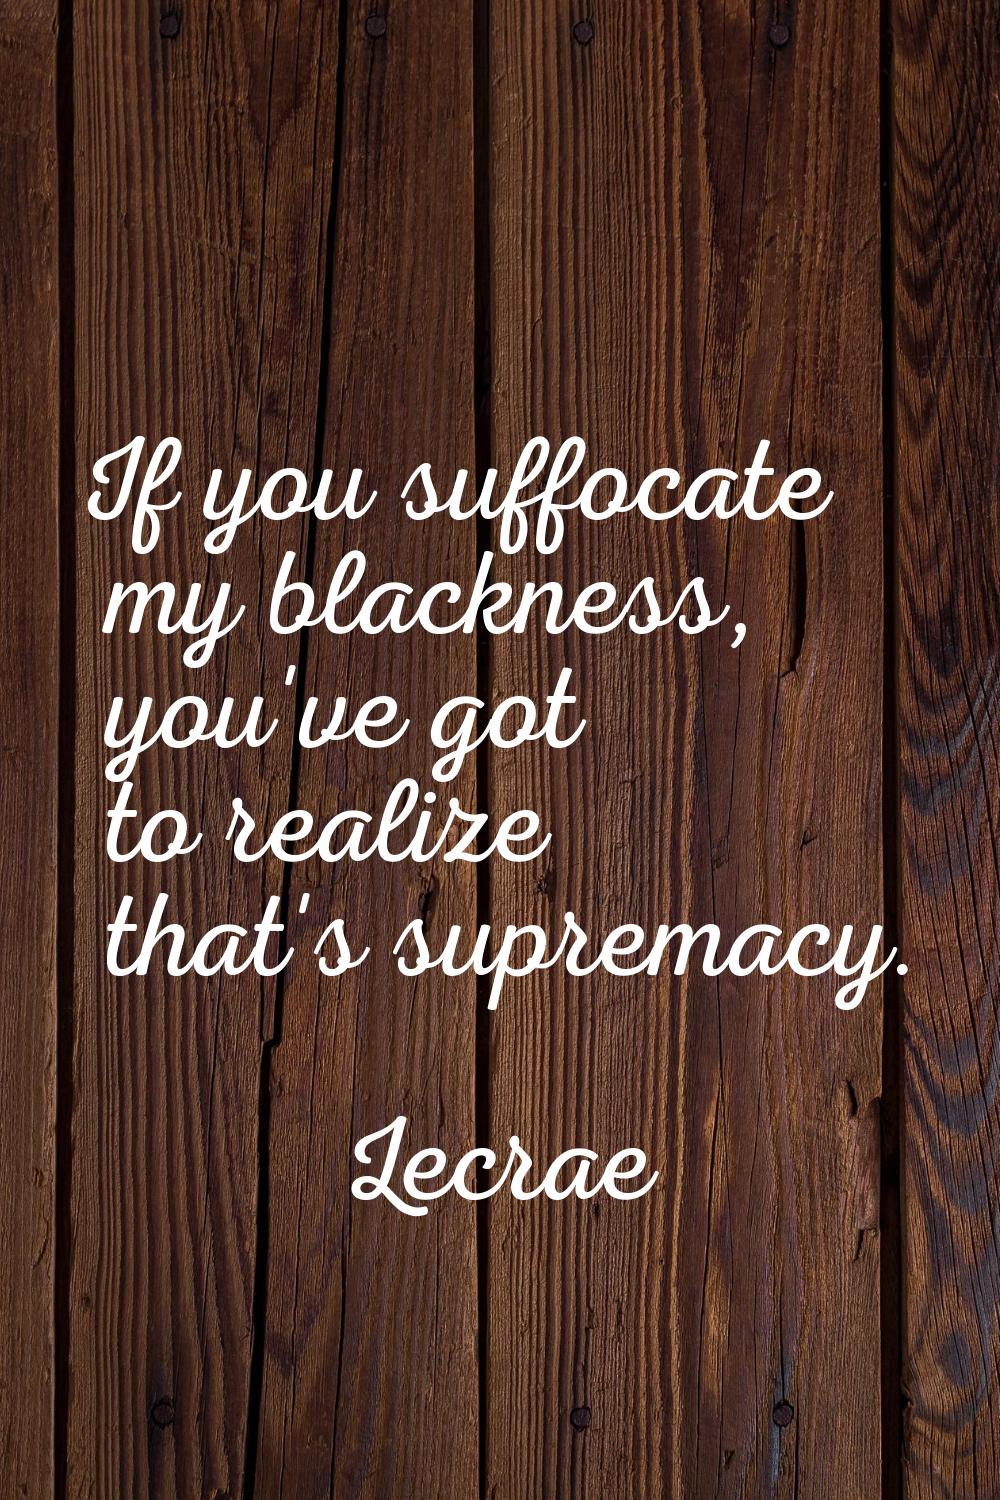 If you suffocate my blackness, you've got to realize that's supremacy.